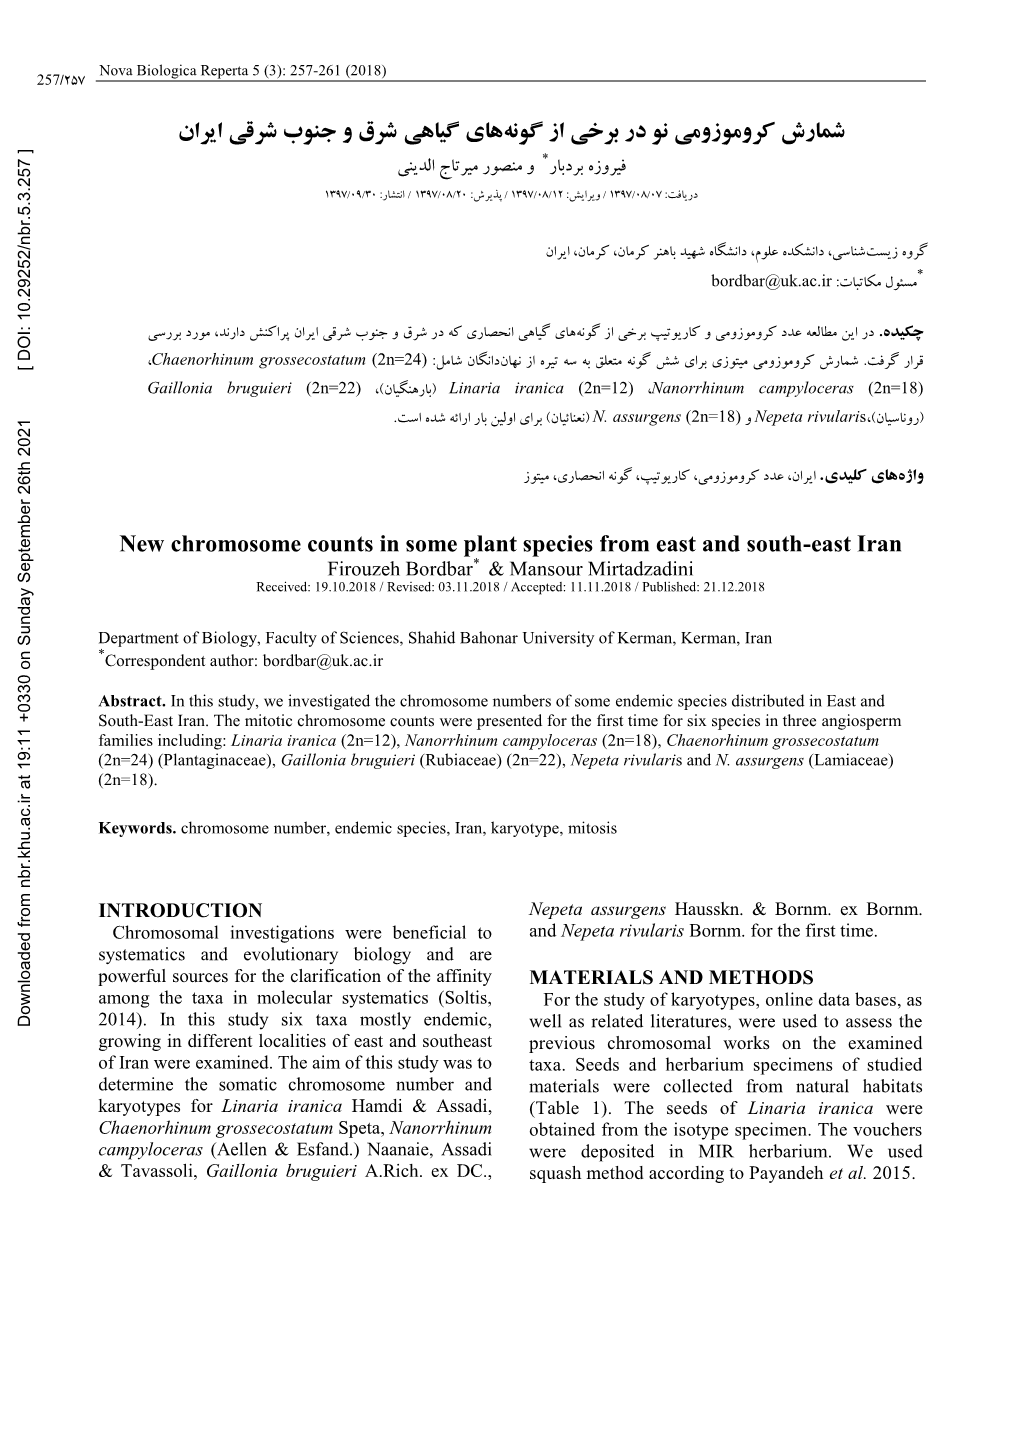 New Chromosome Counts in Some Plant Species from East and South-East Iran